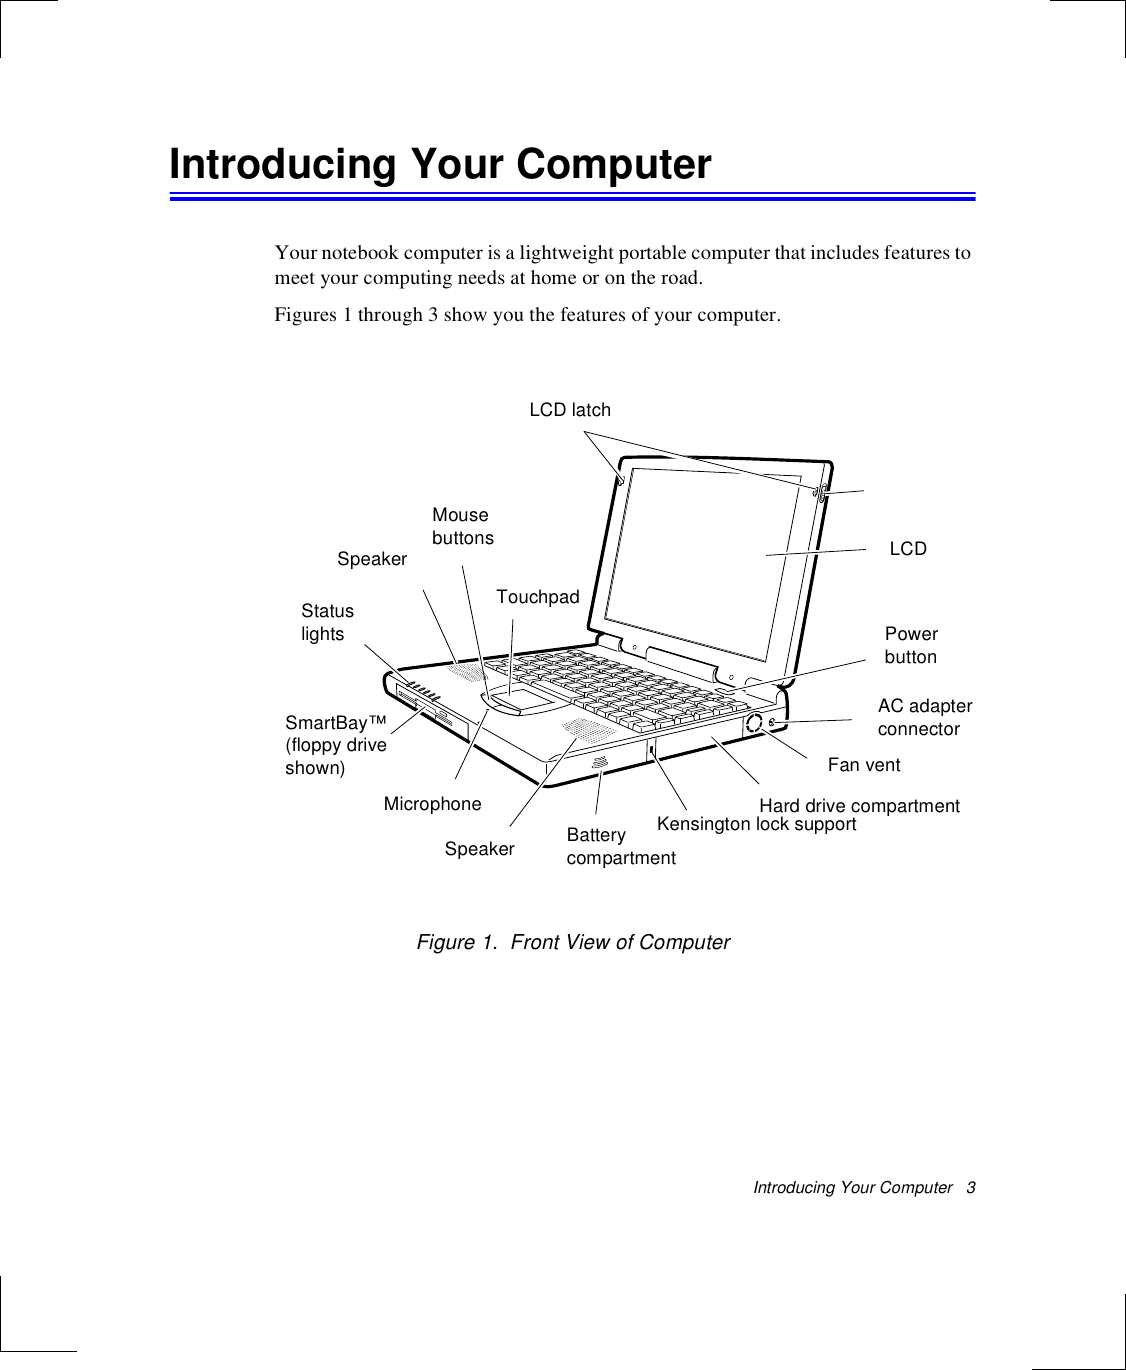 Introducing Your Computer   3Introducing Your ComputerYour notebook computer is a lightweight portable computer that includes features to meet your computing needs at home or on the road. Figures 1 through 3 show you the features of your computer. Figure 1.  Front View of ComputerLCD latchLCDPowerbuttonAC adapter connectorFan ventHard drive compartmentBatterycompartmentKensington lock supportTouchpadMicrophoneSpeakerSpeakerMousebuttonsStatuslightsSmartBay™(floppy driveshown)